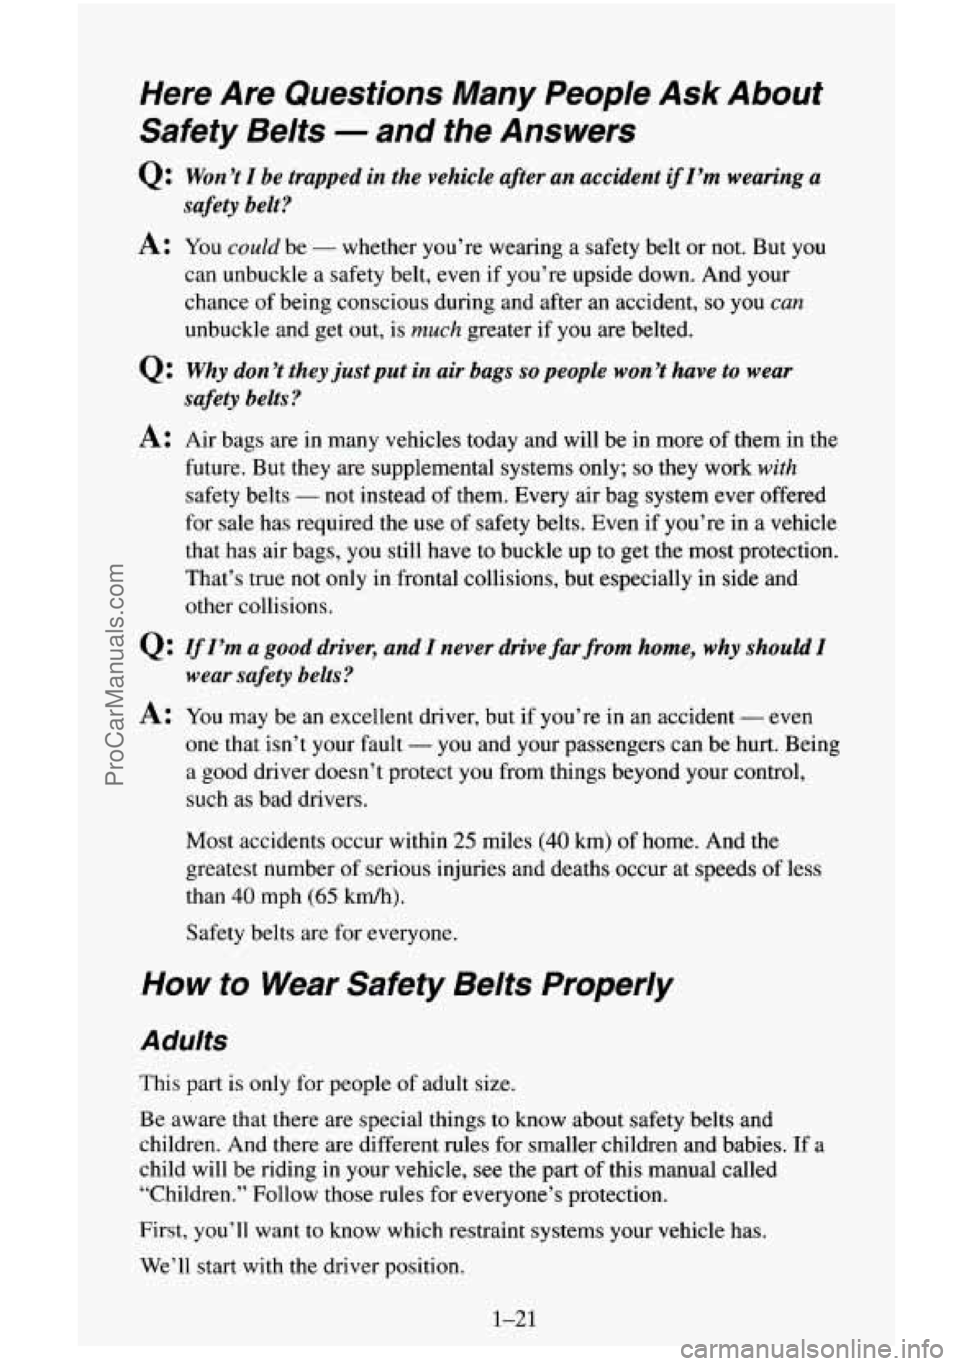 CHEVROLET SUBURBAN 1995  Owners Manual Here Are Questions  Many  People Ask About 
Safety  Belts 
- and  the  Answers 
Q: Won’t I be trapped  in the  vehicle  after  an accident if I’m wearing  a 
A: You could be - whether you’re wea